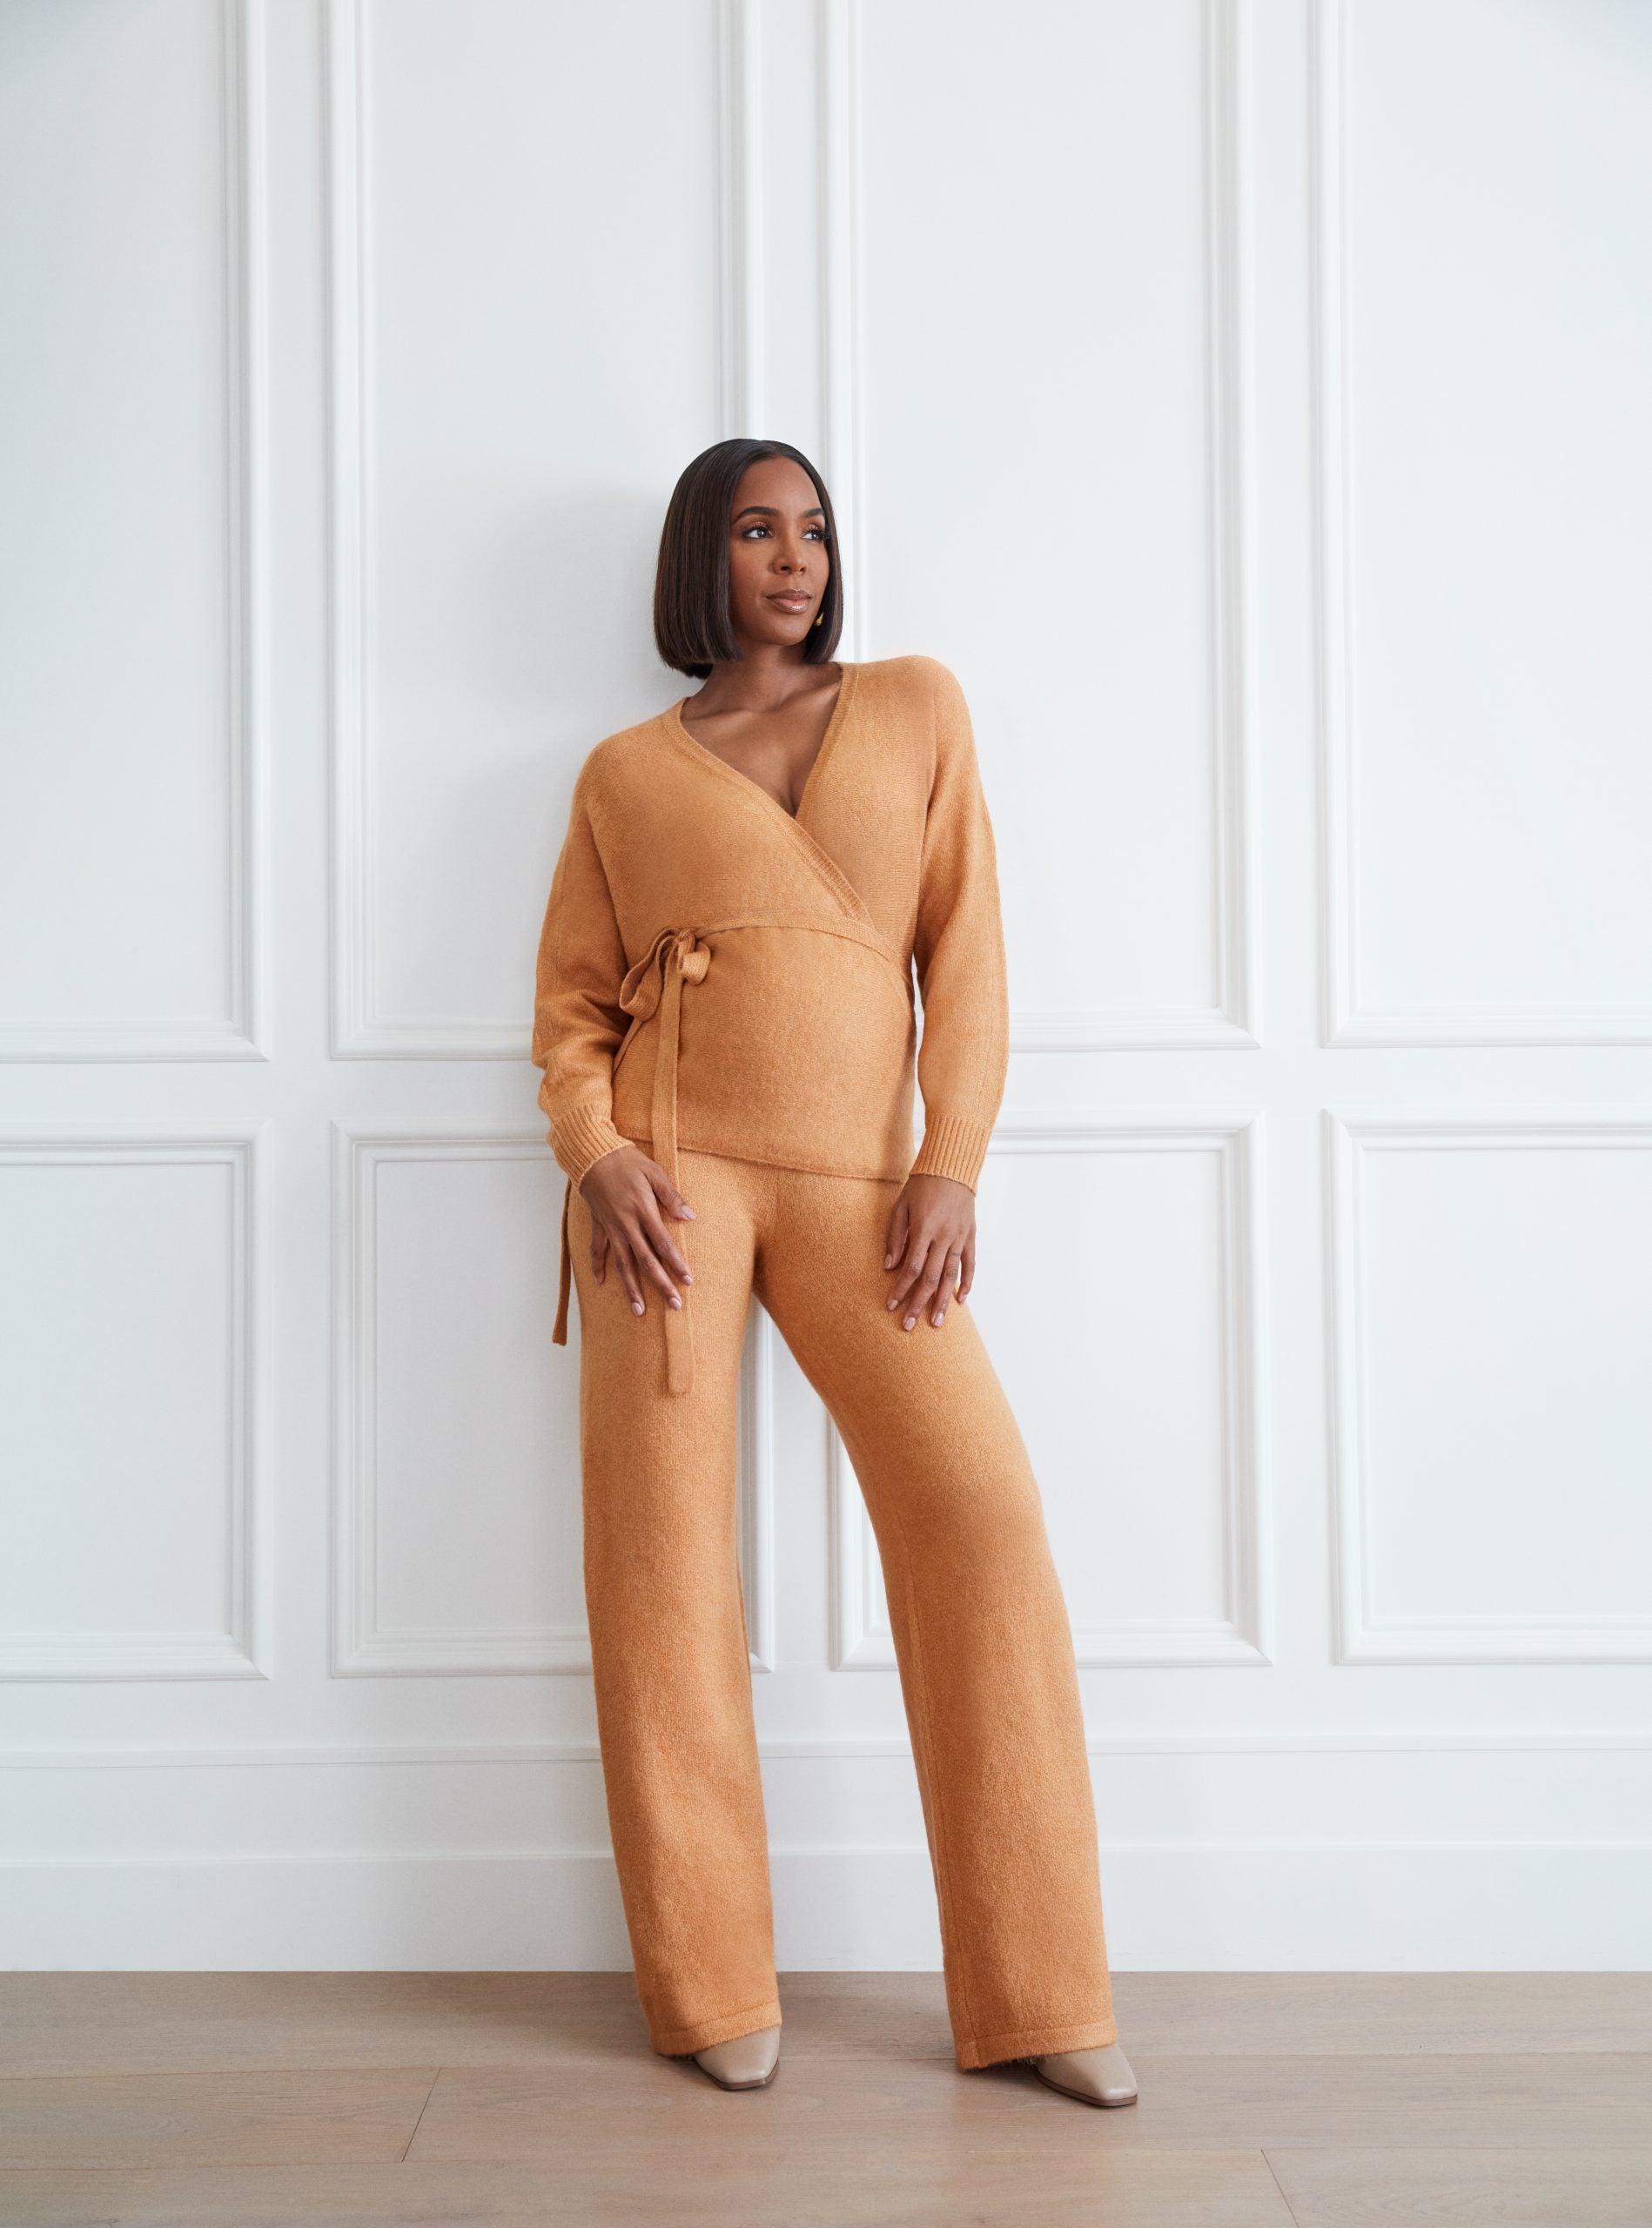 Kelly Rowland Collaborates With JustFab To Create The Ultimate Fall Collection